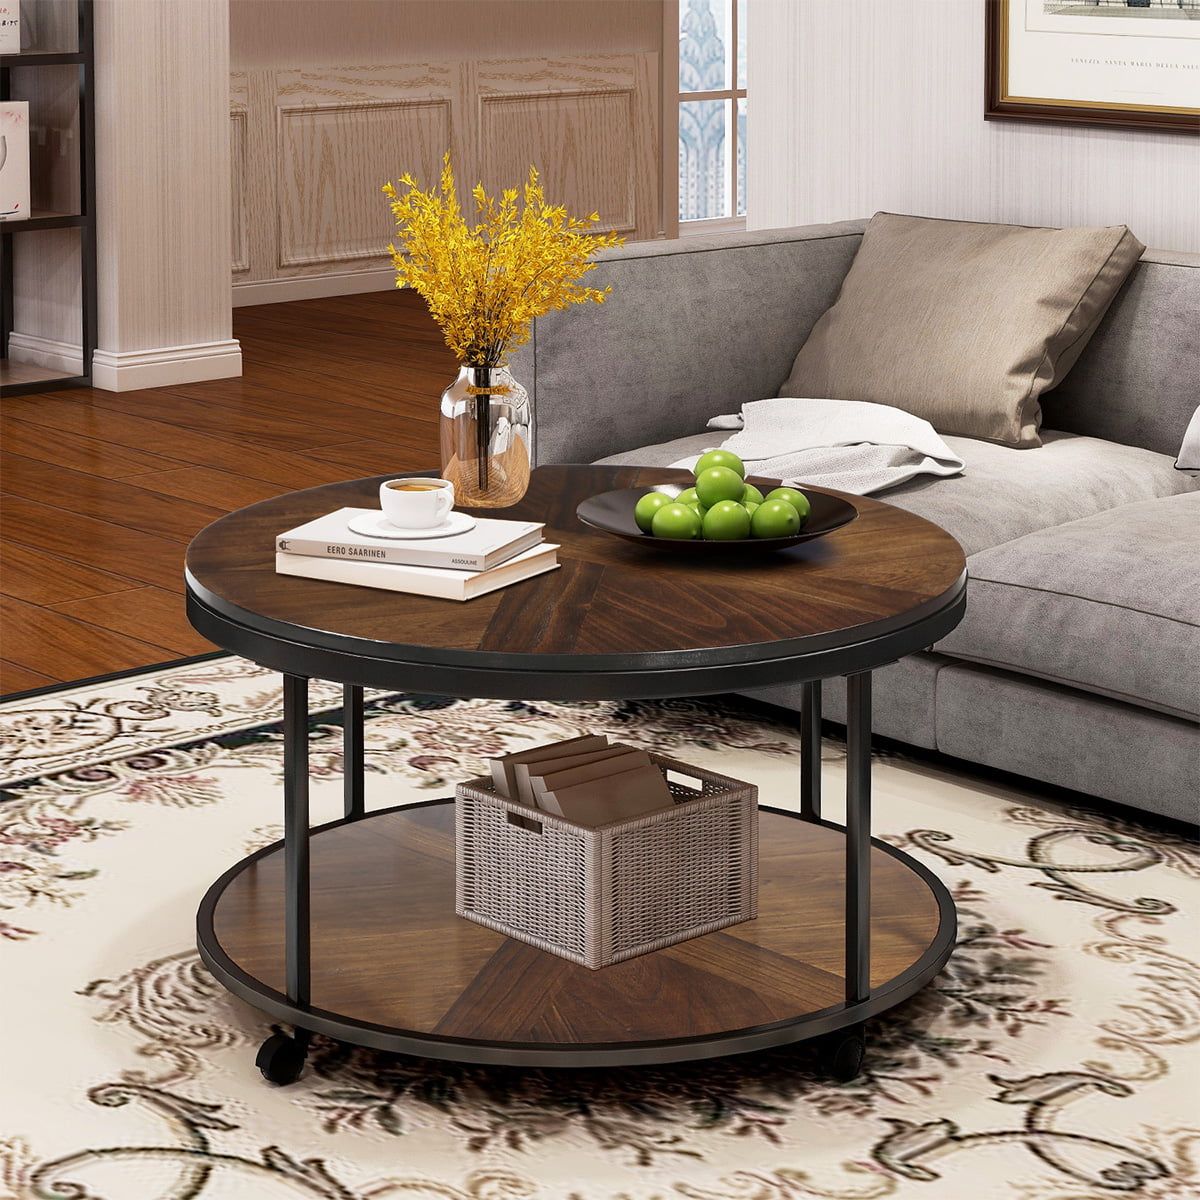 Sentern Round Coffee Table With Caster Wheels And Unique Textured Within Coffee Tables With Casters (View 2 of 21)